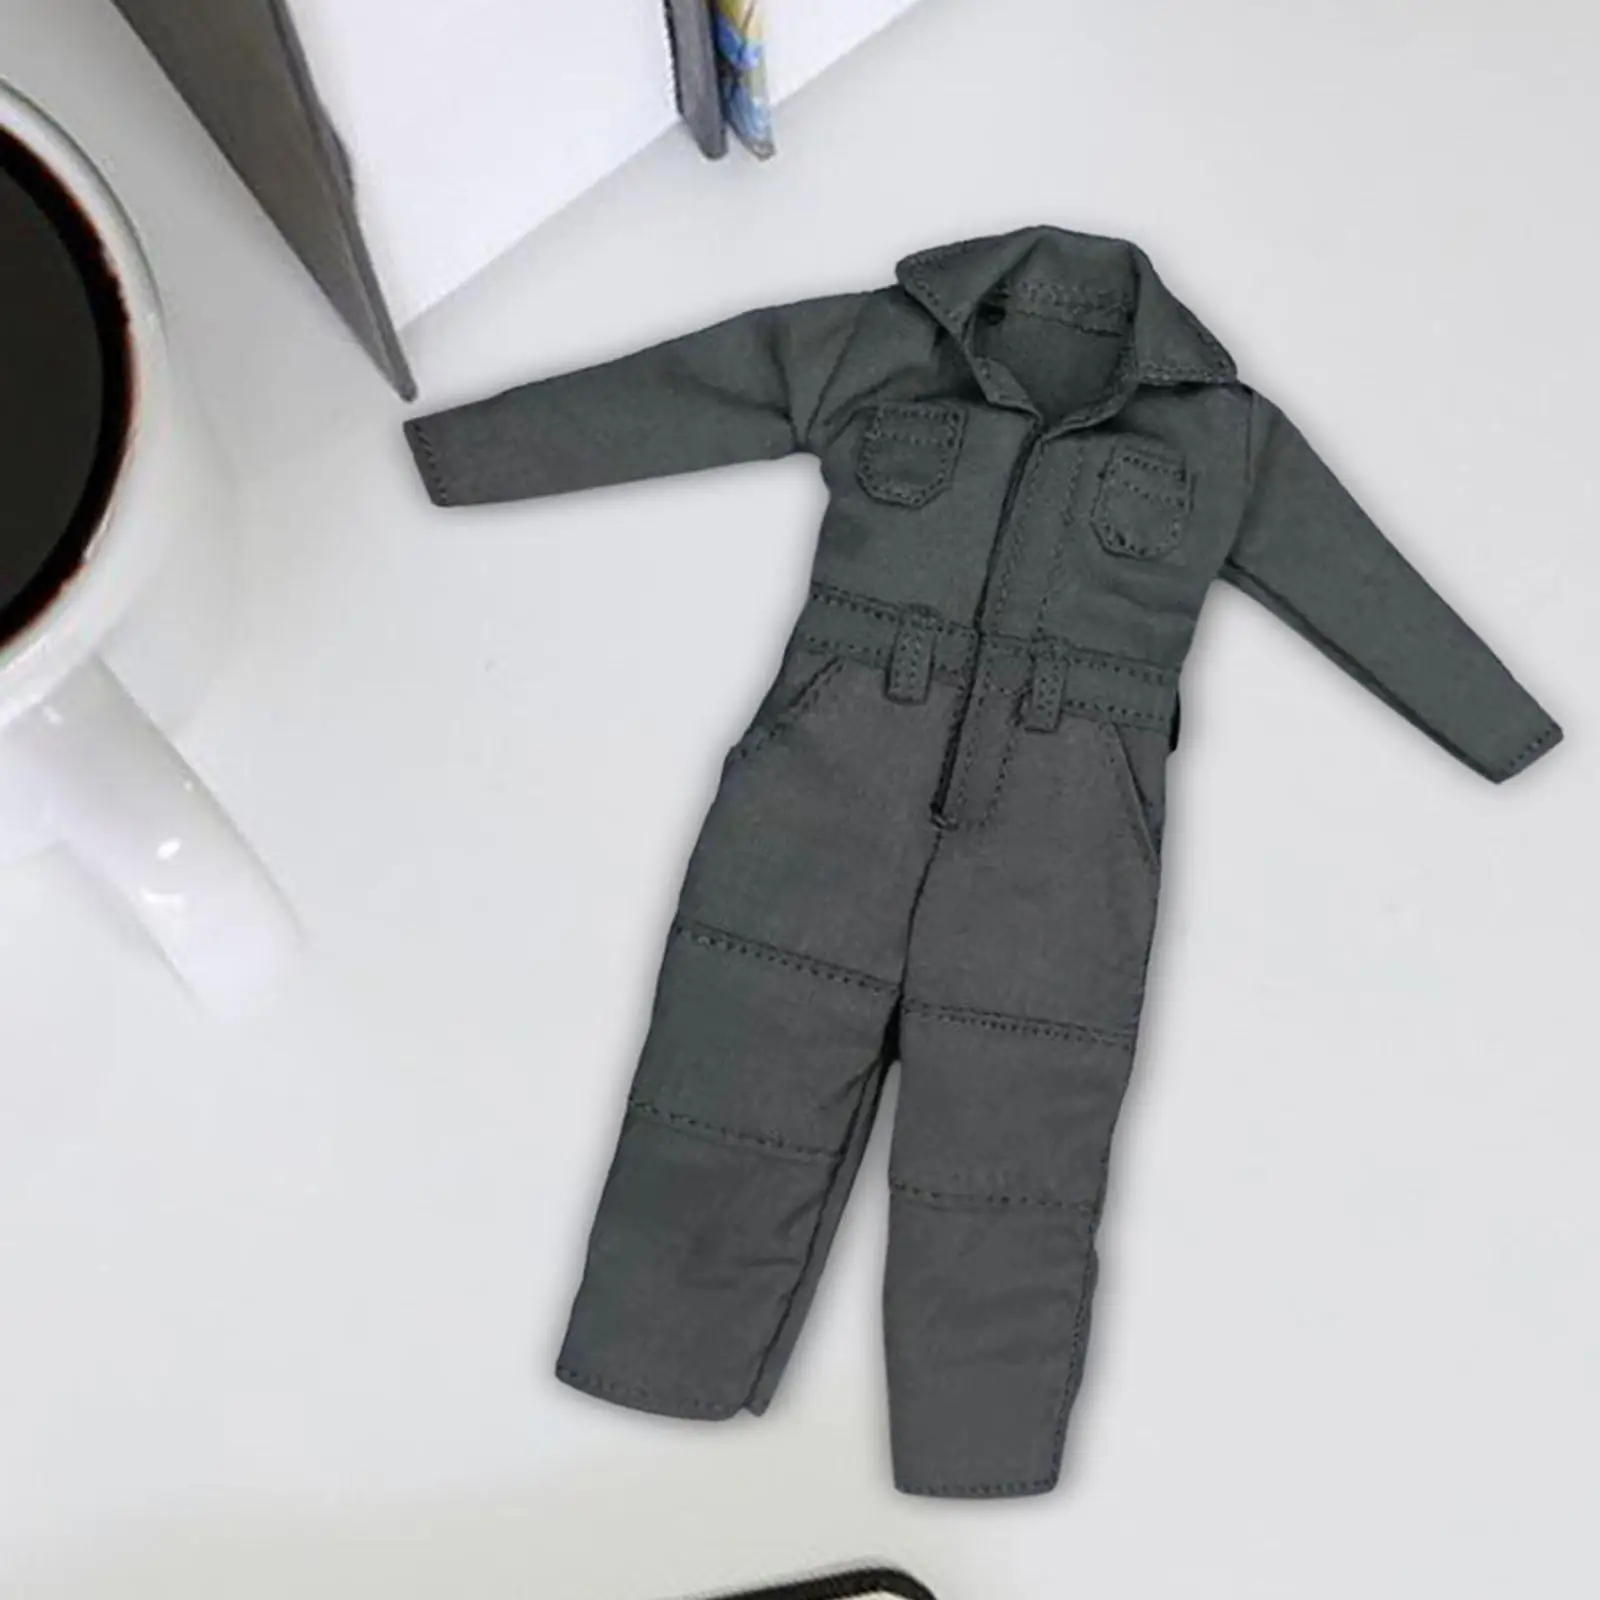 1/12 Scale Jumpsuit Handmade Action Figures Coveralls for Club Show Bedroom